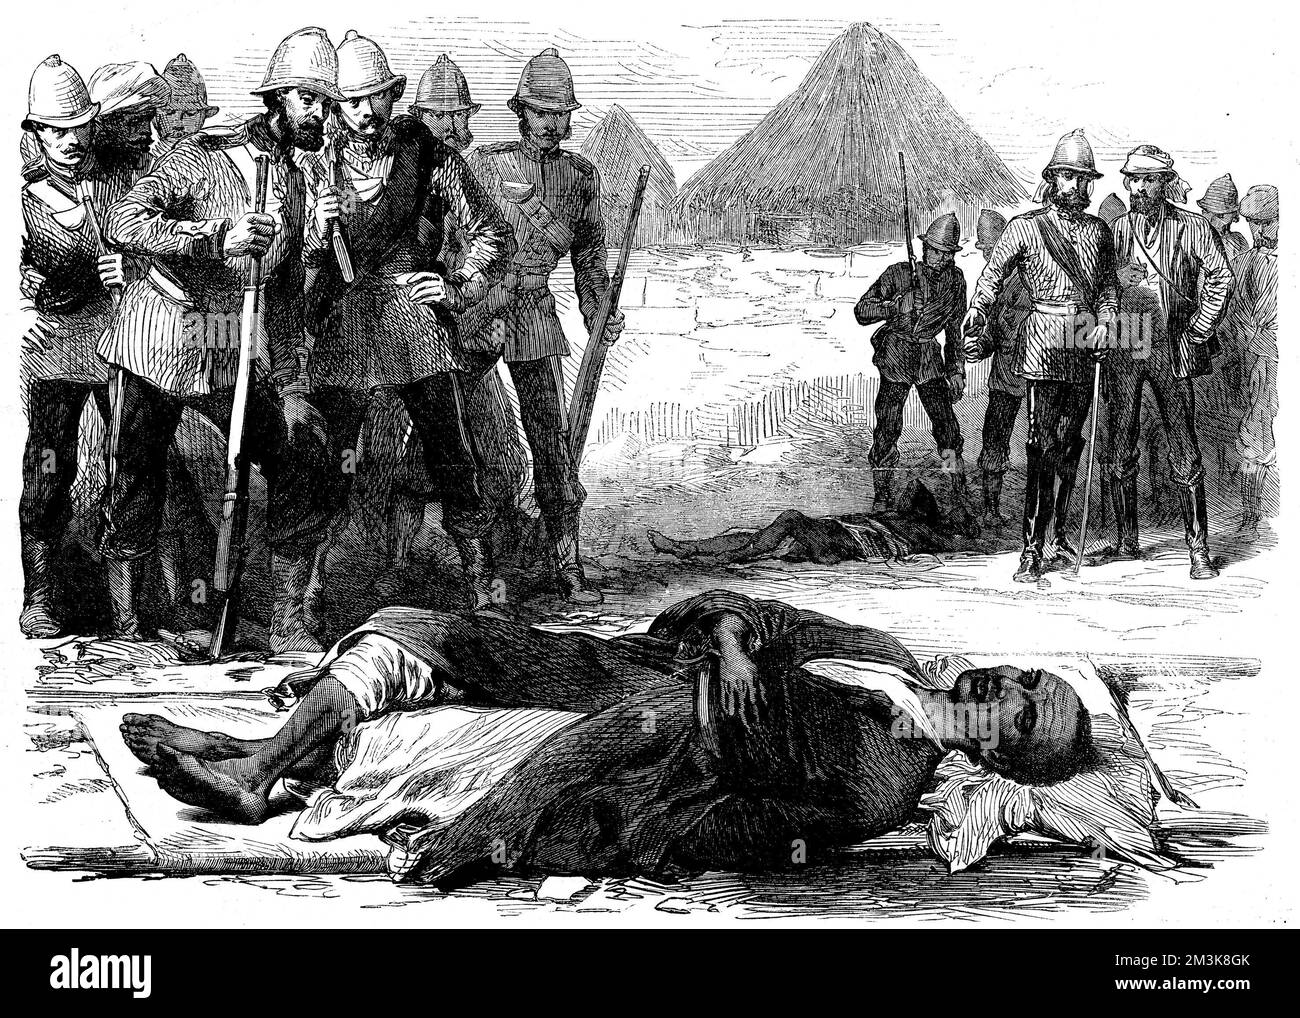 The British 1868 Expedition to Abyssinia was a punitive expedition against King Theodore, after he had imprisoned missionaries and representatives of the British. After the British had defeated the Abyssinian Army at Islamgee, King Theodore shot himself in the fortress of Magdala. Stock Photo